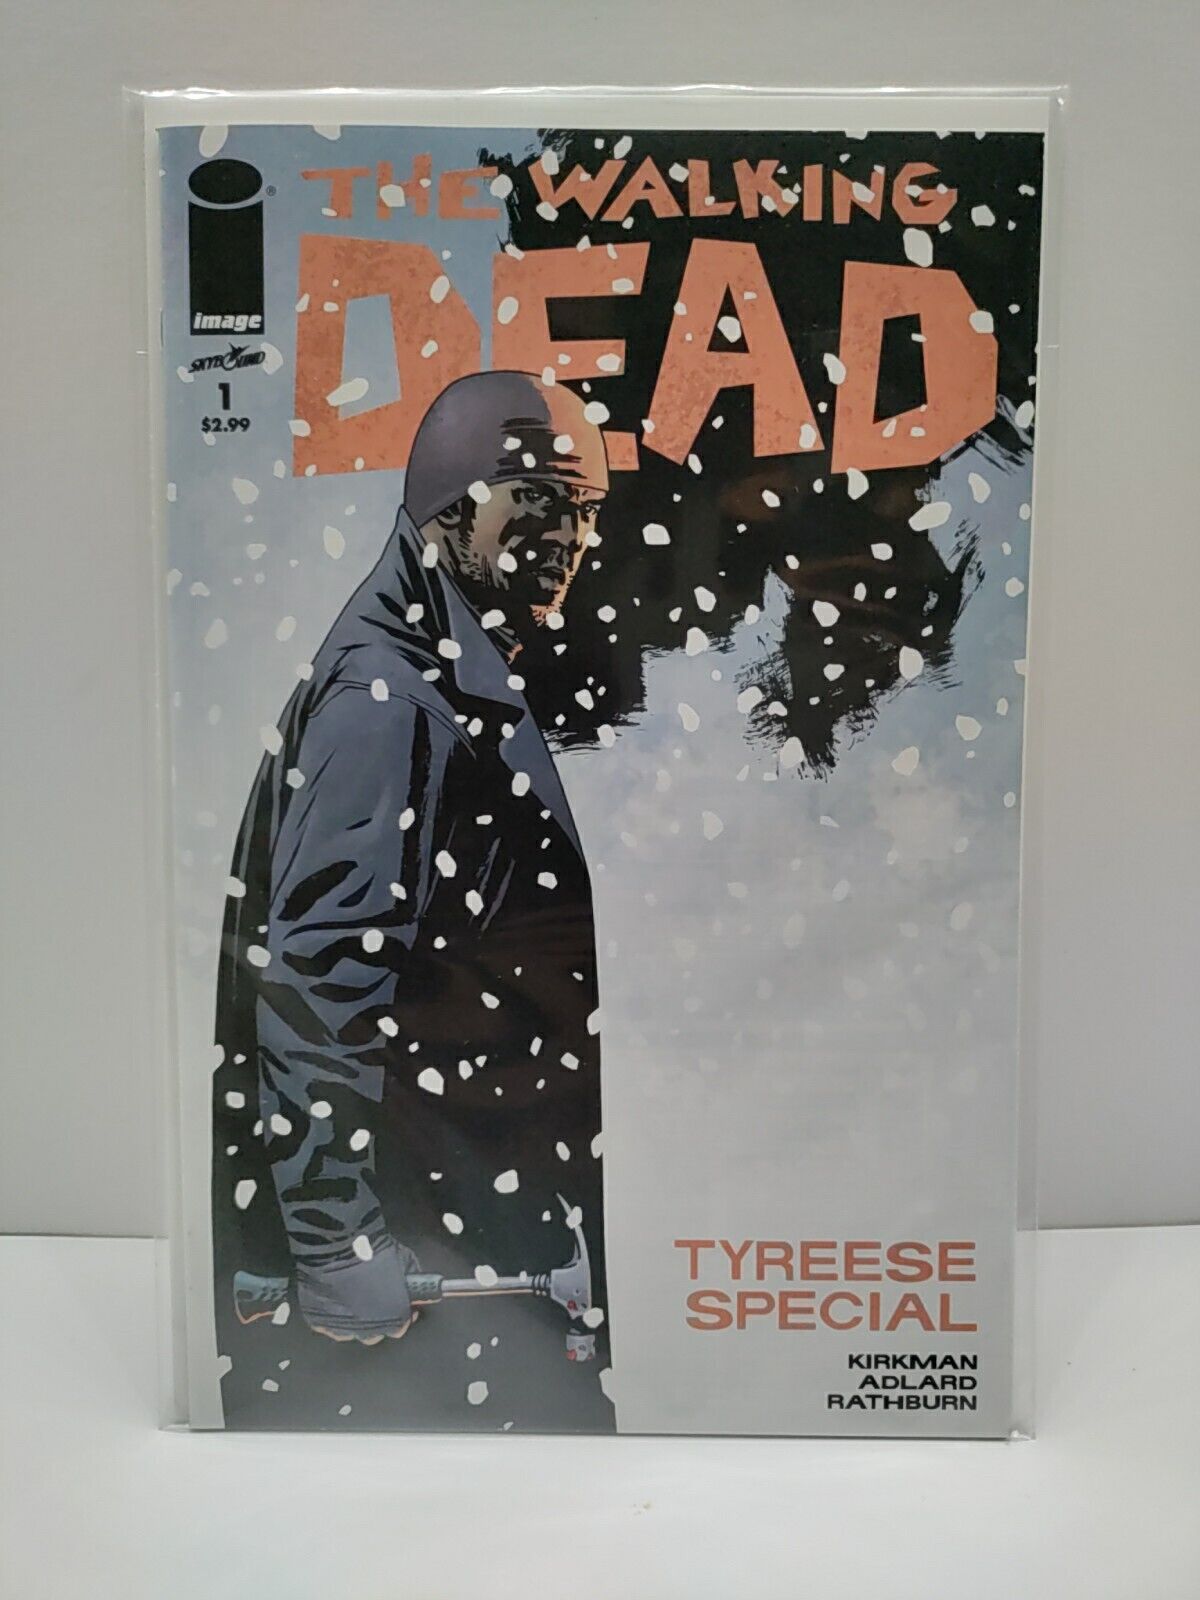 THE WALKING DEAD #1 IMAGE COMICS TYREESE SPECIAL